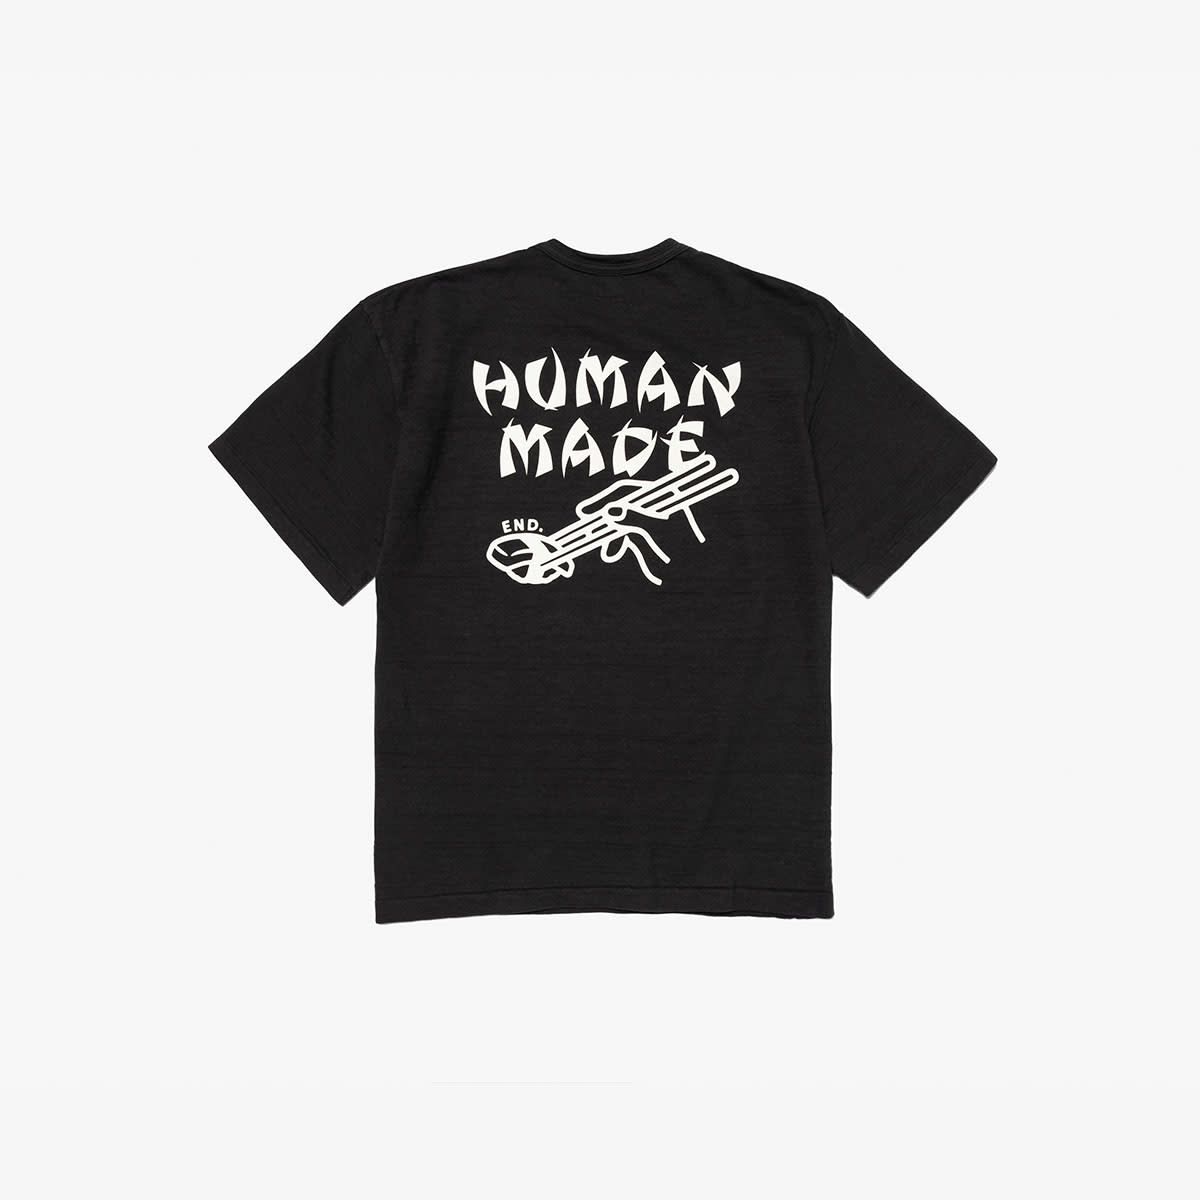 HUMAN MADE/END.コラボ sushi Tシャツ/黒/L-